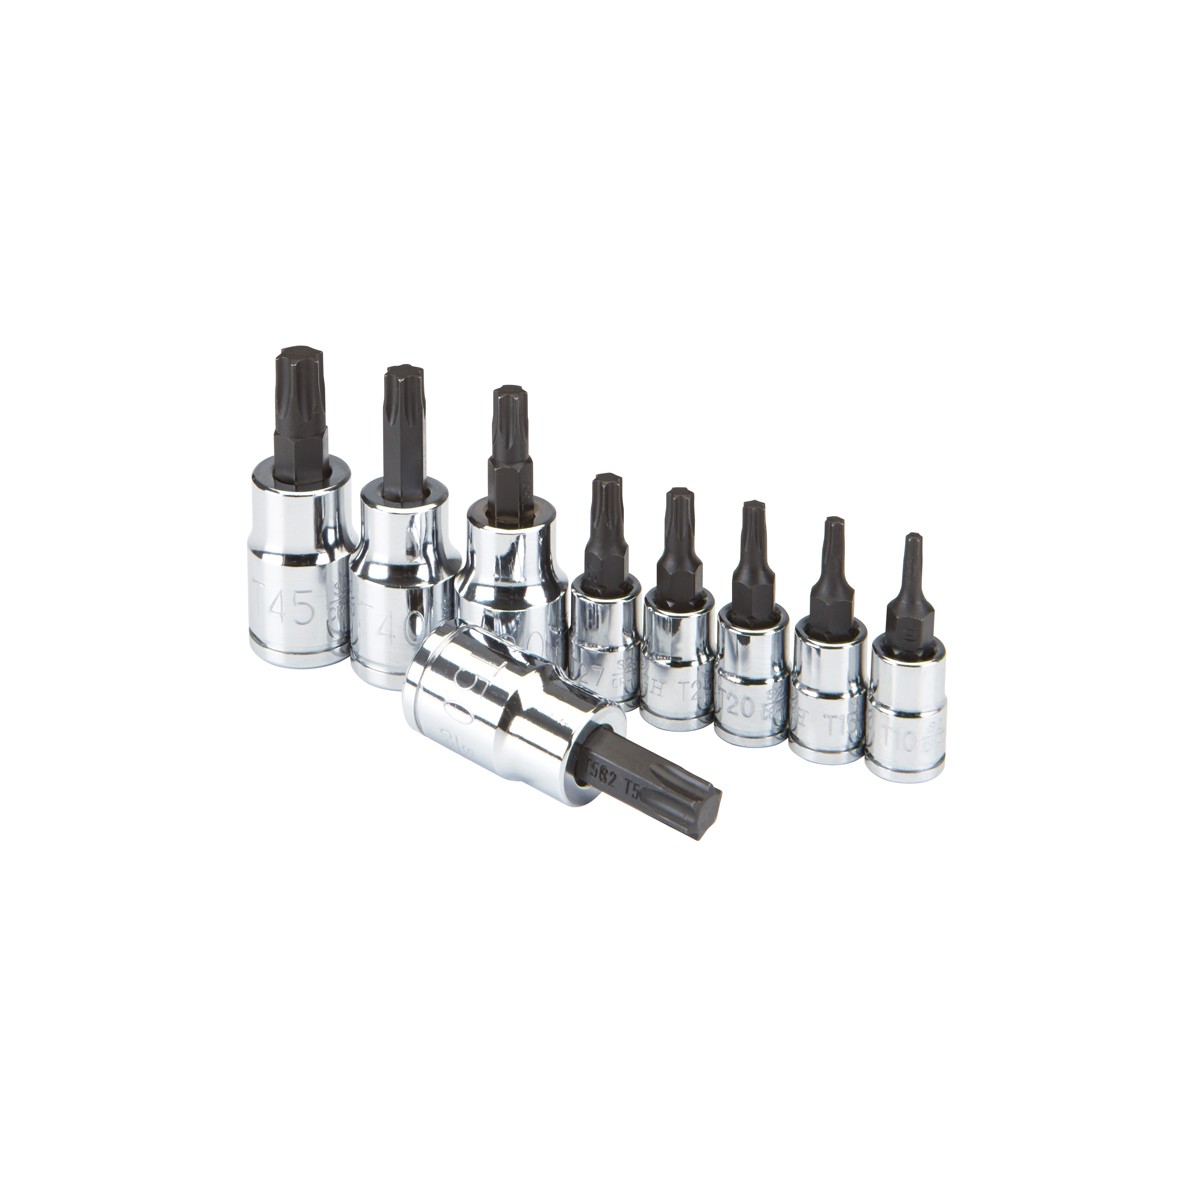 9 Pc 1/4 in. and 3/8 in. Drive Star Bit Socket Set